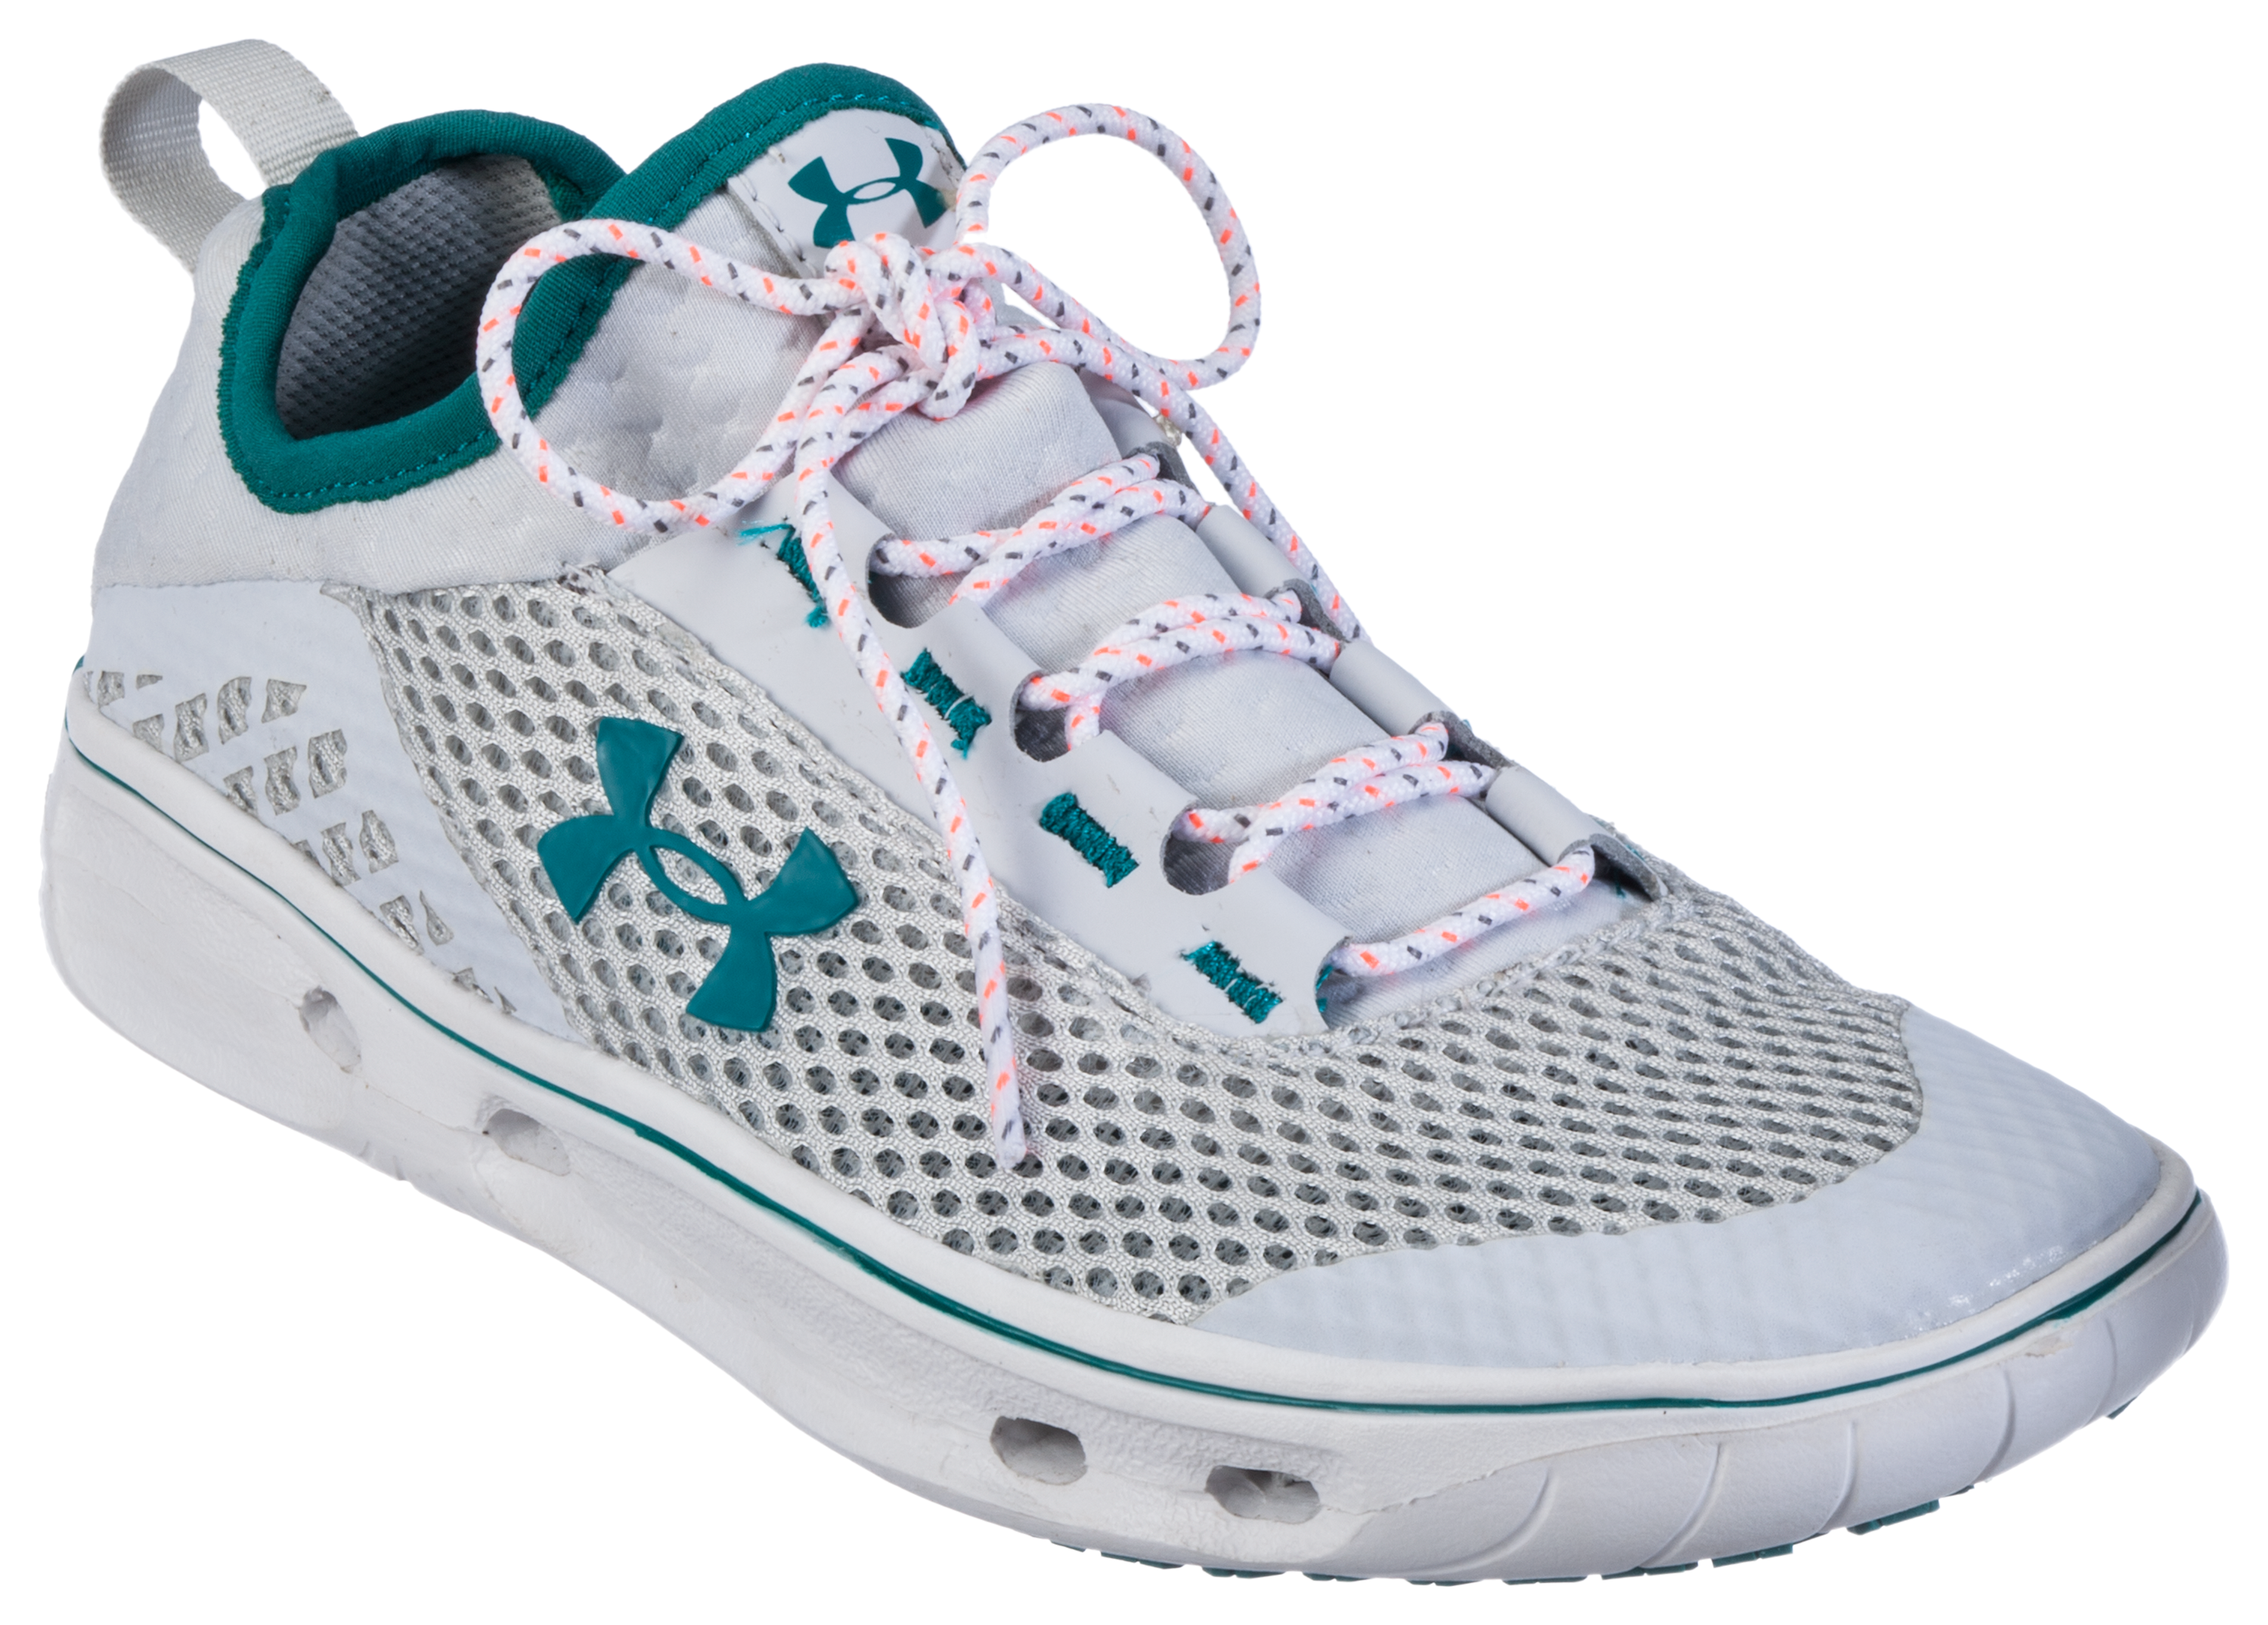 Under Armour Kilchis Water Shoes for Ladies